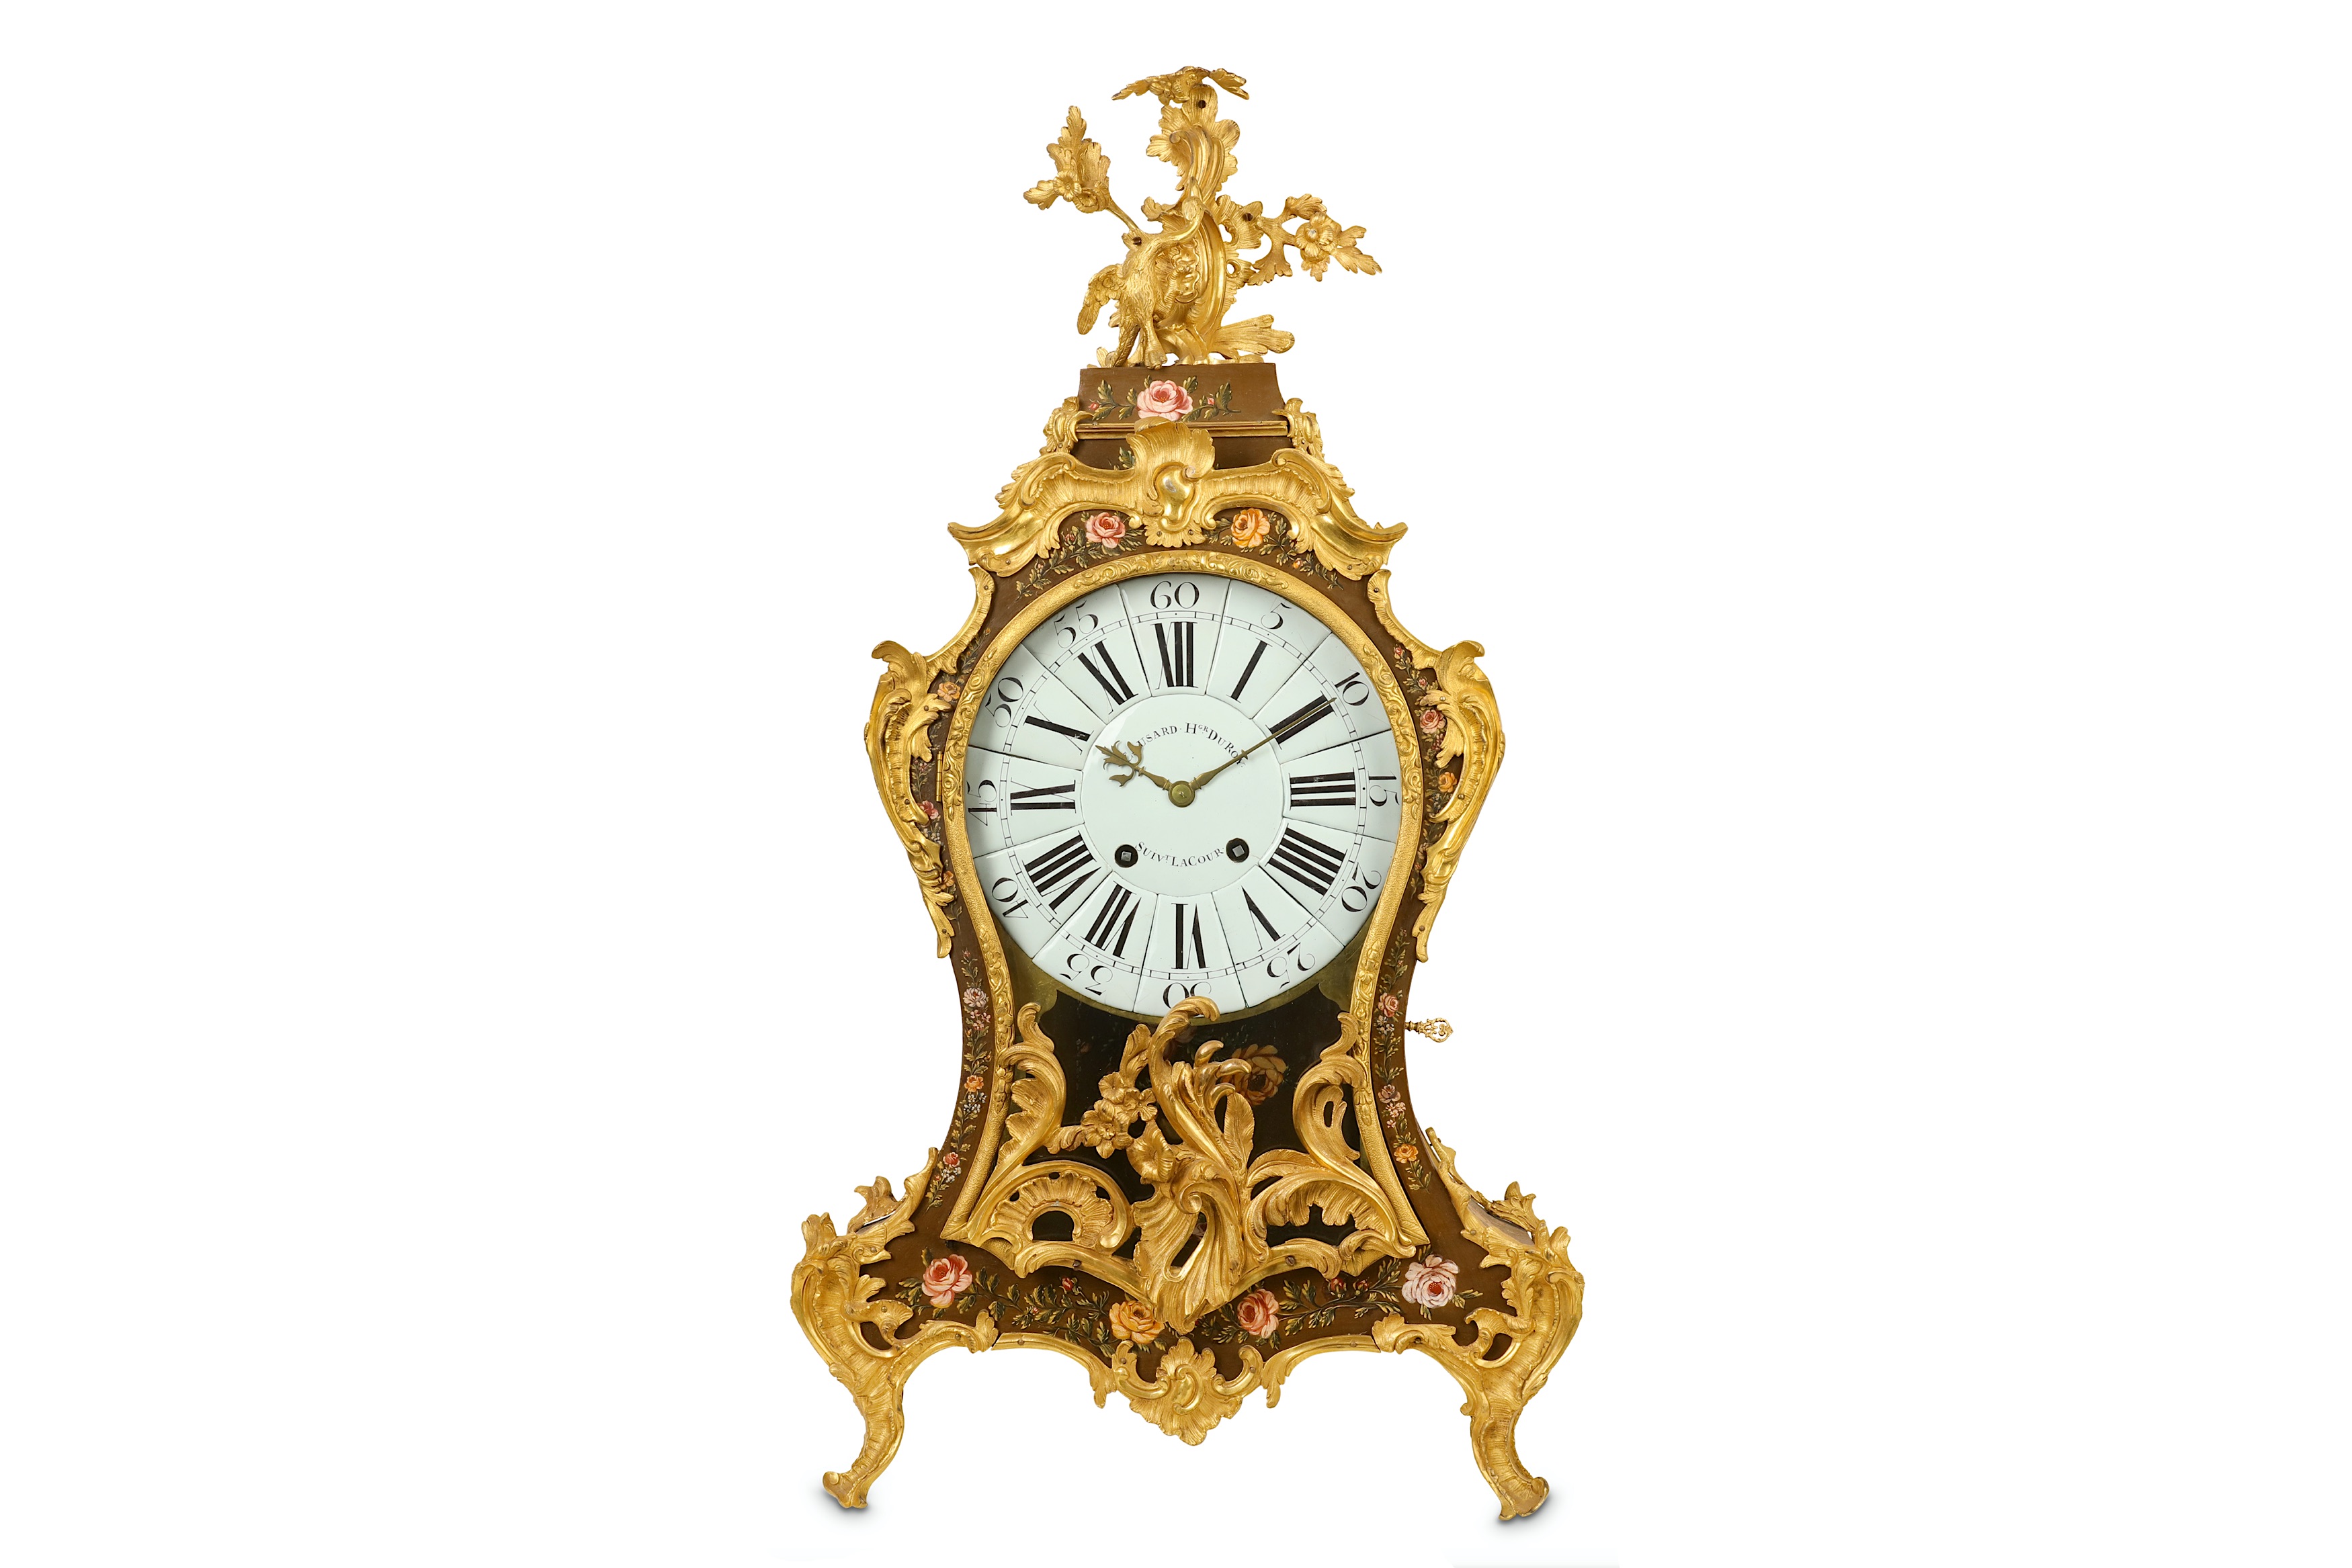 A LARGE 18TH CENTURY FRENCH LOUIS XV PERIOD PAINTED AND GILT BRONZE MOUNTED BRACKET CLOCK SIGNED - Image 7 of 7